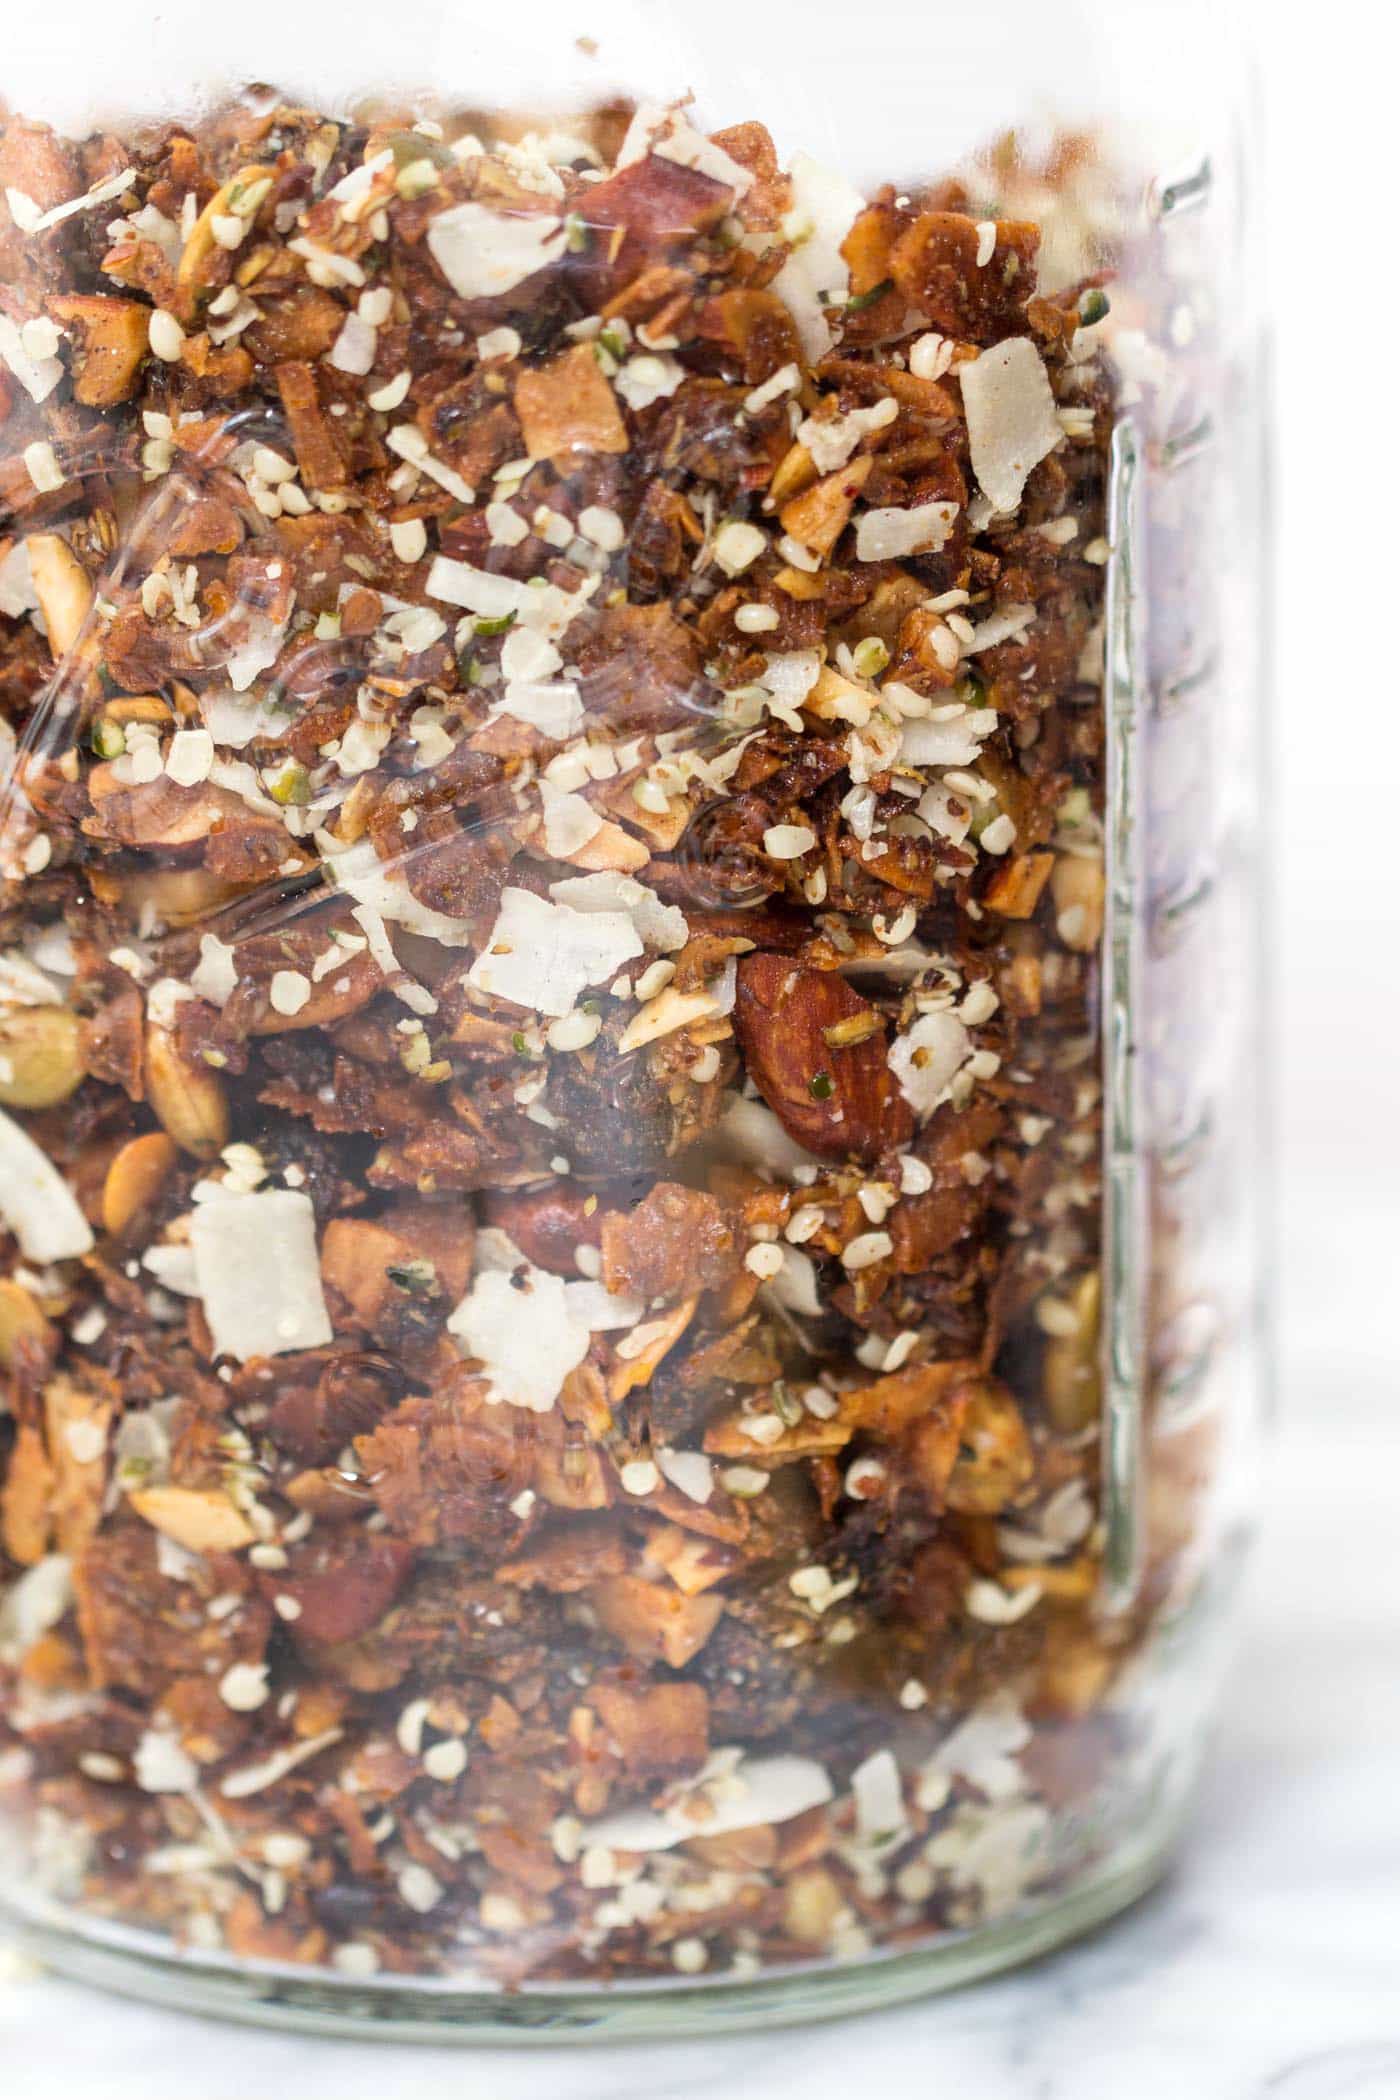 This grain-free coconut granola is the PERFECT recipe for those avoiding oats or living on the paleo diet!